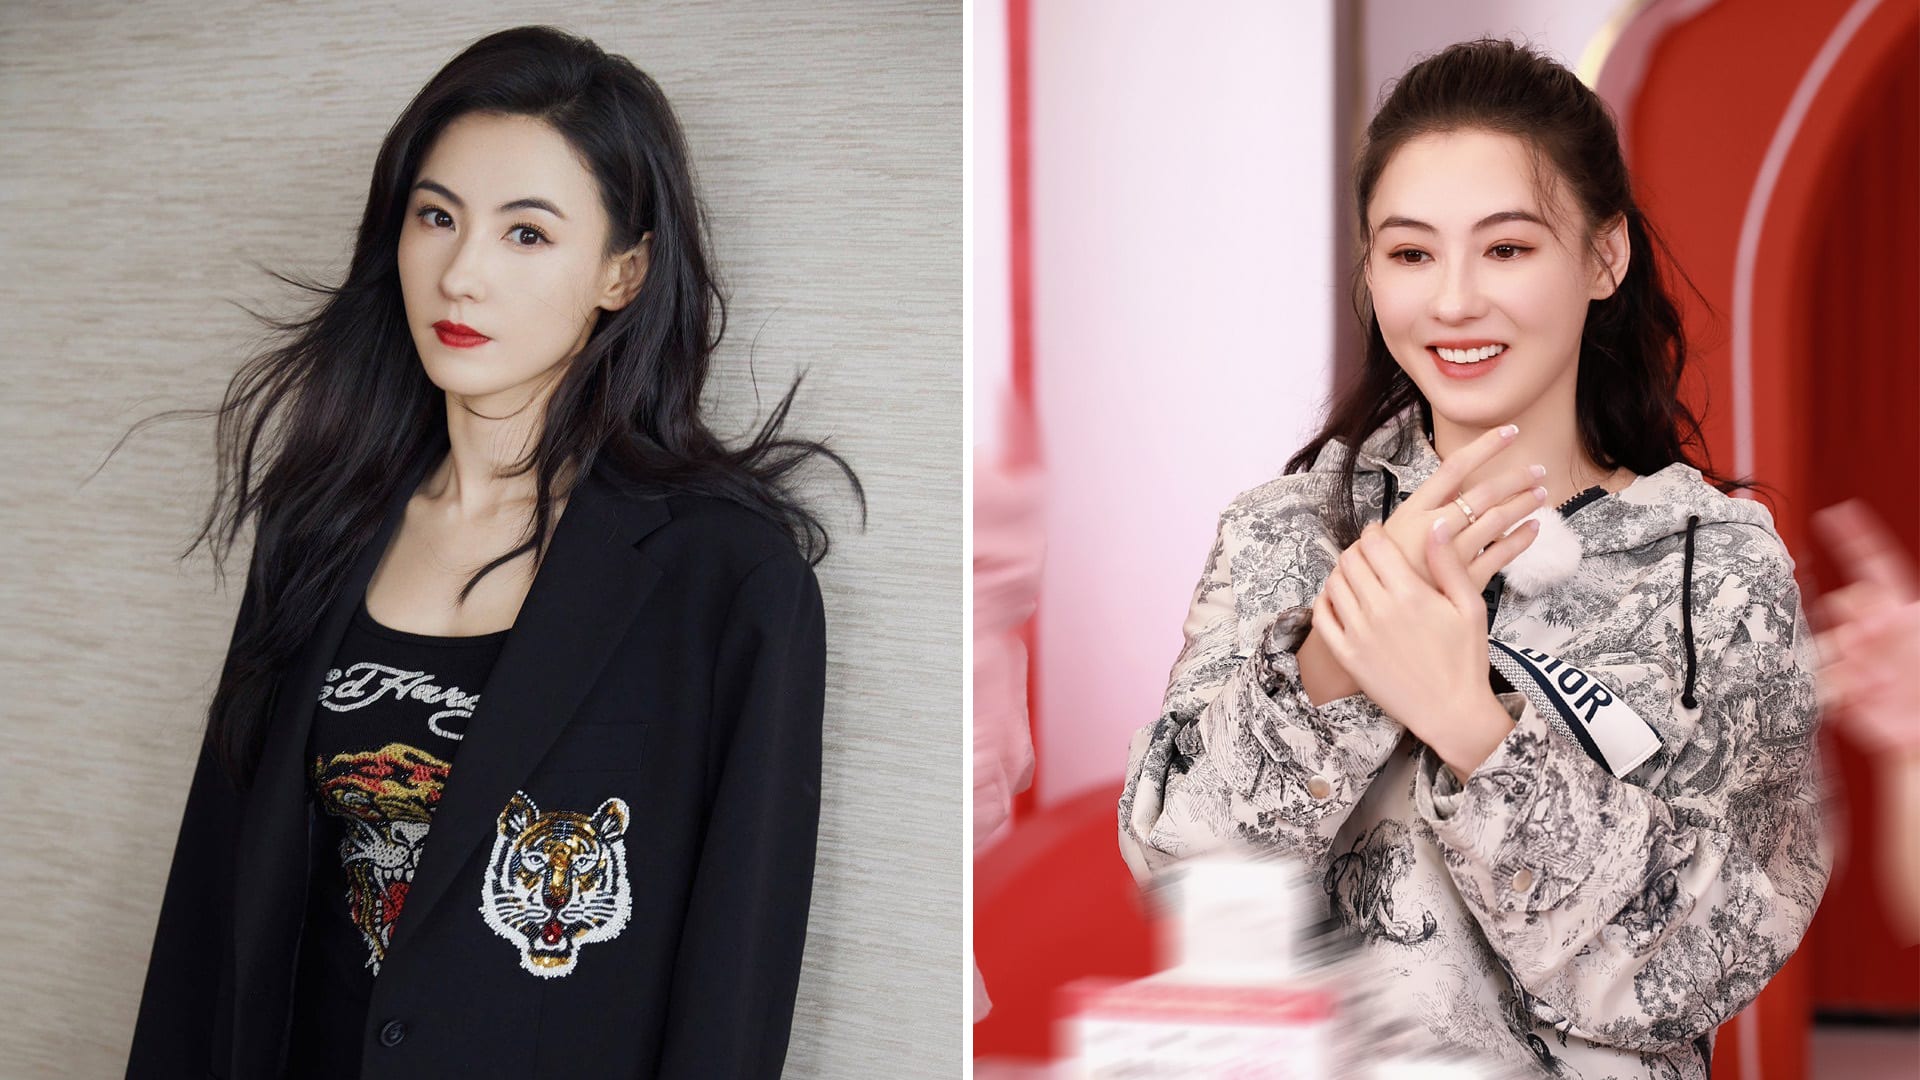 Cecilia Cheung Misreads Price Of Make-Up Kit During Live Stream Sale, Pays S$10.7K Difference Out Of Her Own Pocket